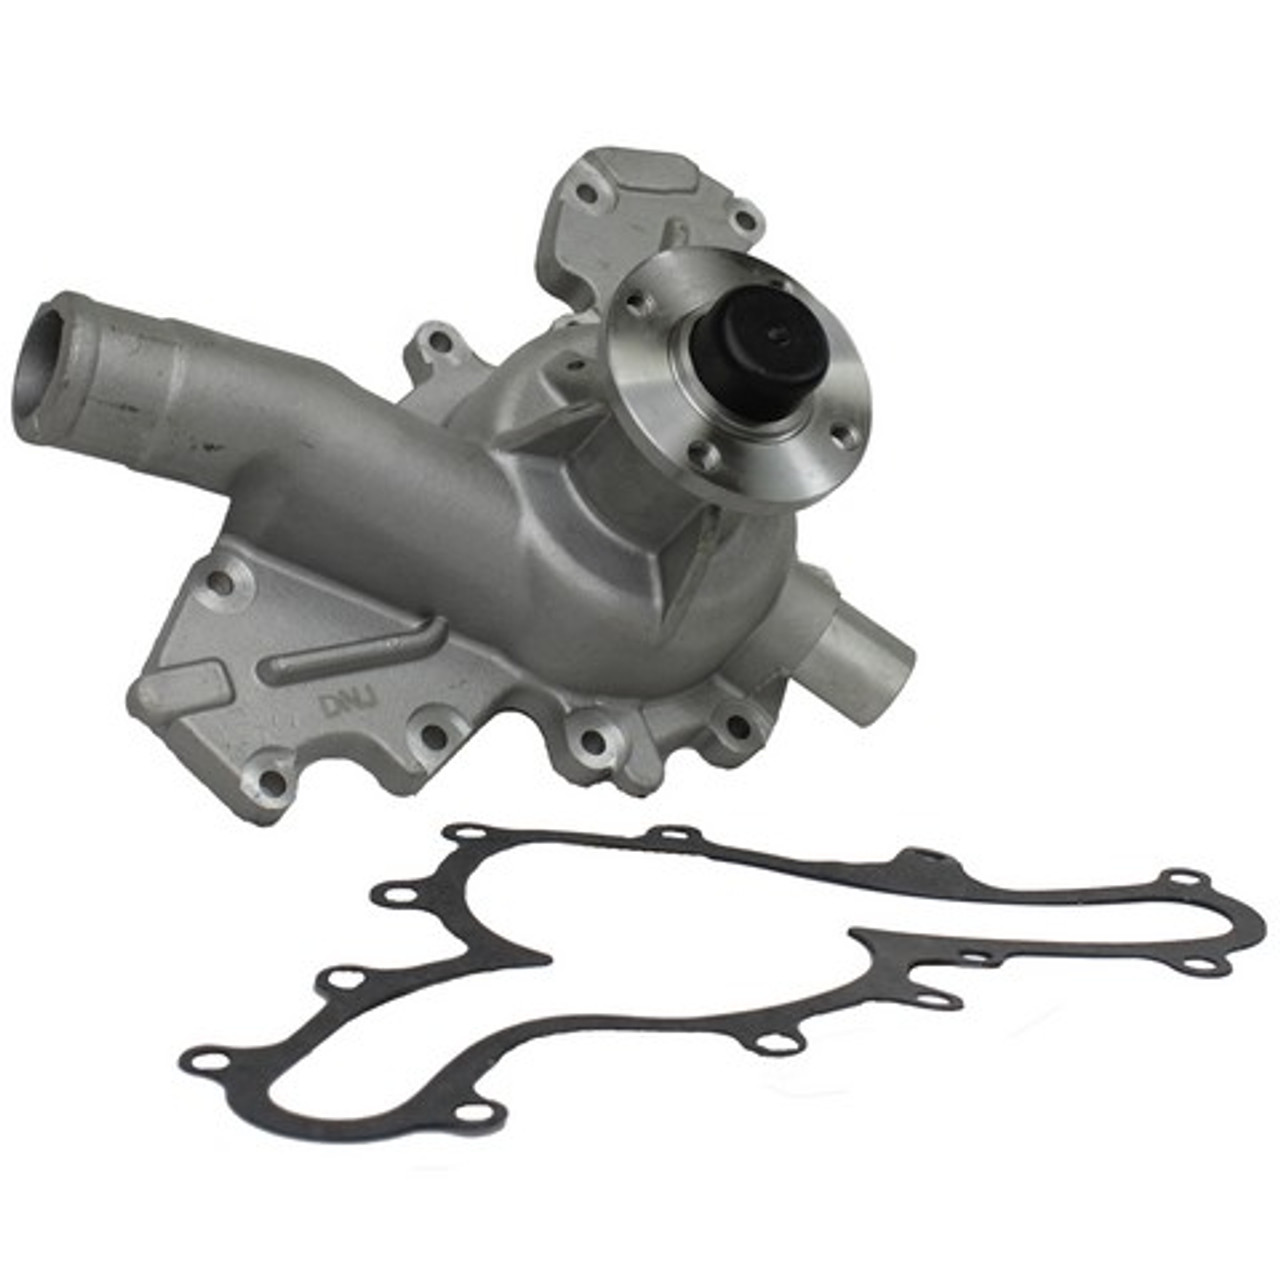 Water Pump 4.0L 2005 Ford Mustang - WP4028.23